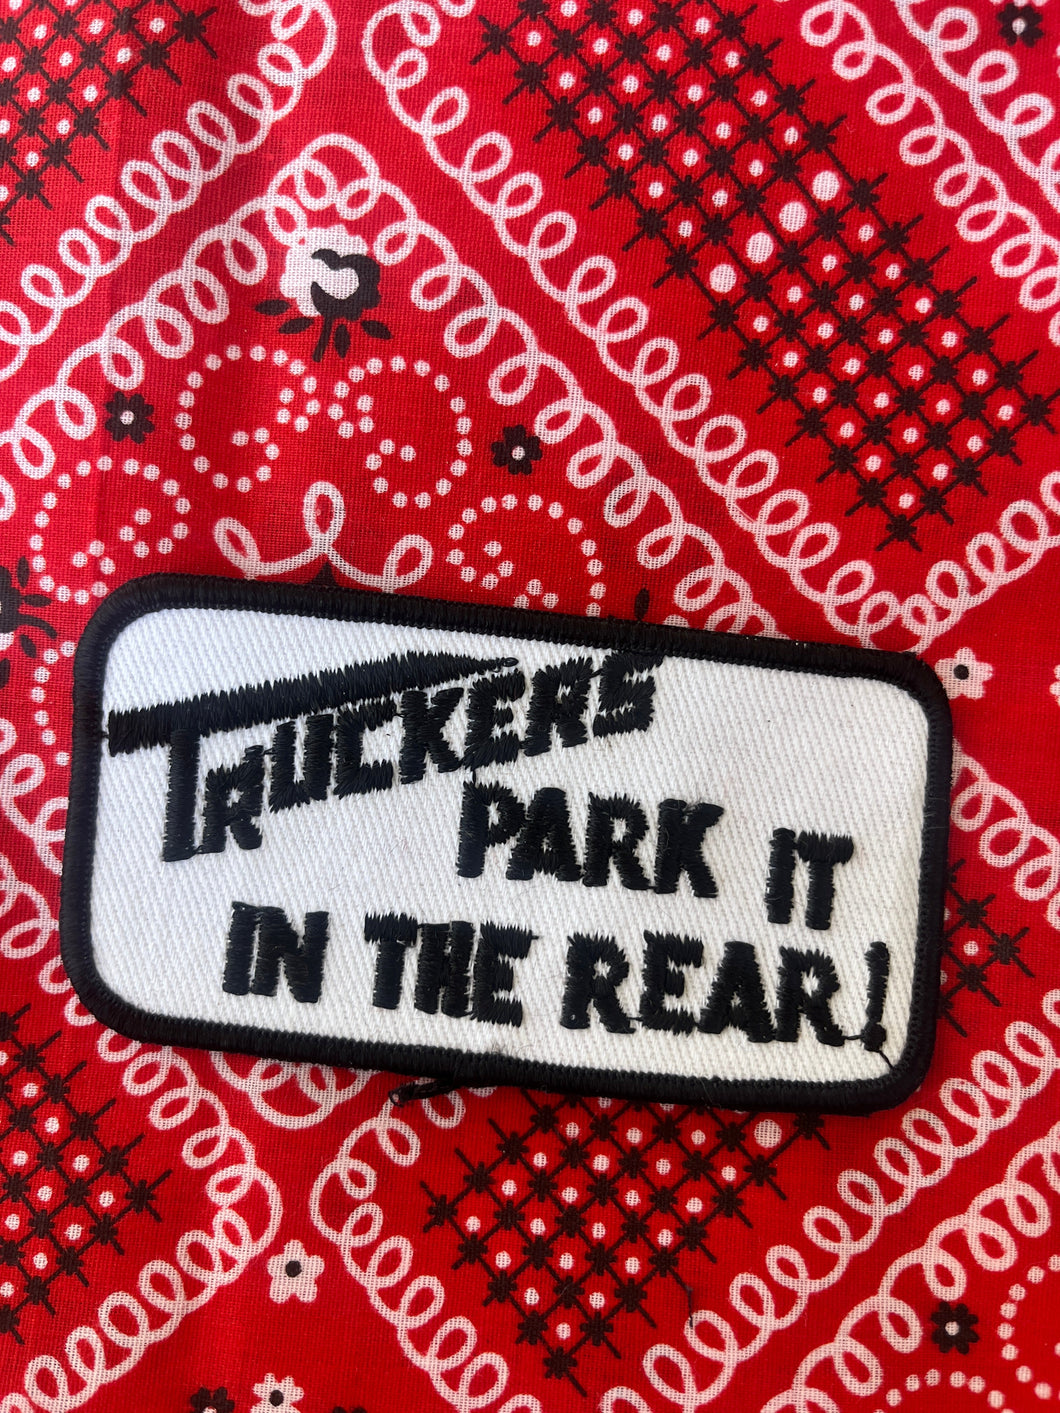 Truckers Park it in the Rear Patch